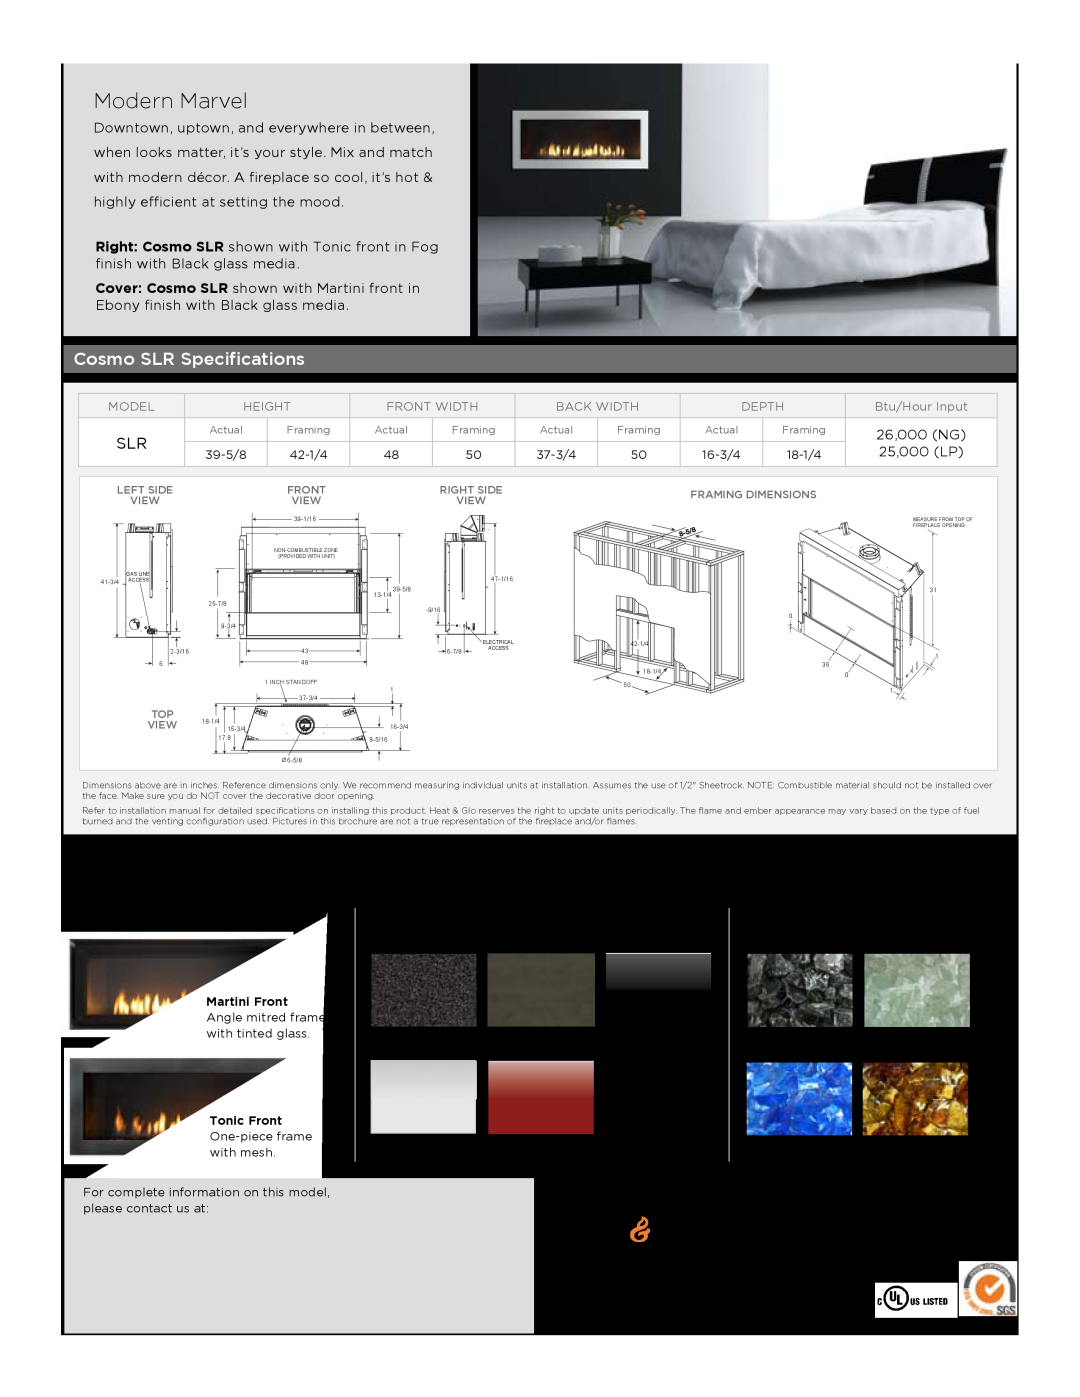 Hearth and Home Technologies manual Modern Marvel, Cosmo SLR Specifications, Front Options 